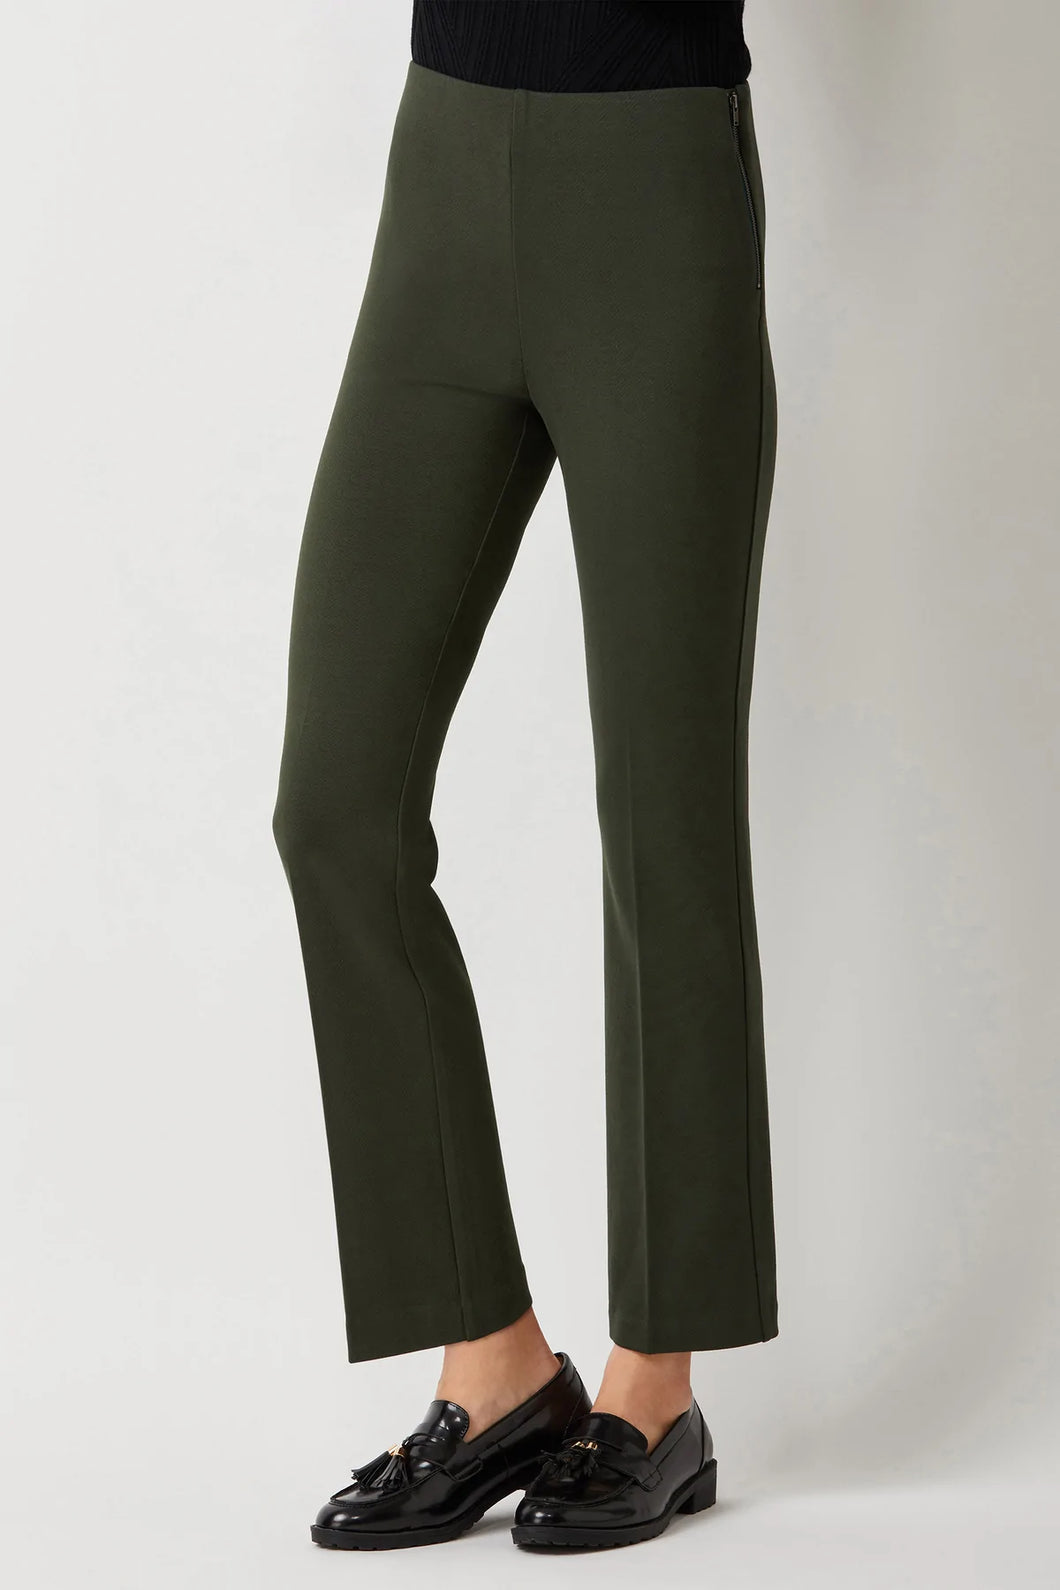 PRINCE CROPPED FLARE LEG PANT IN ARMY